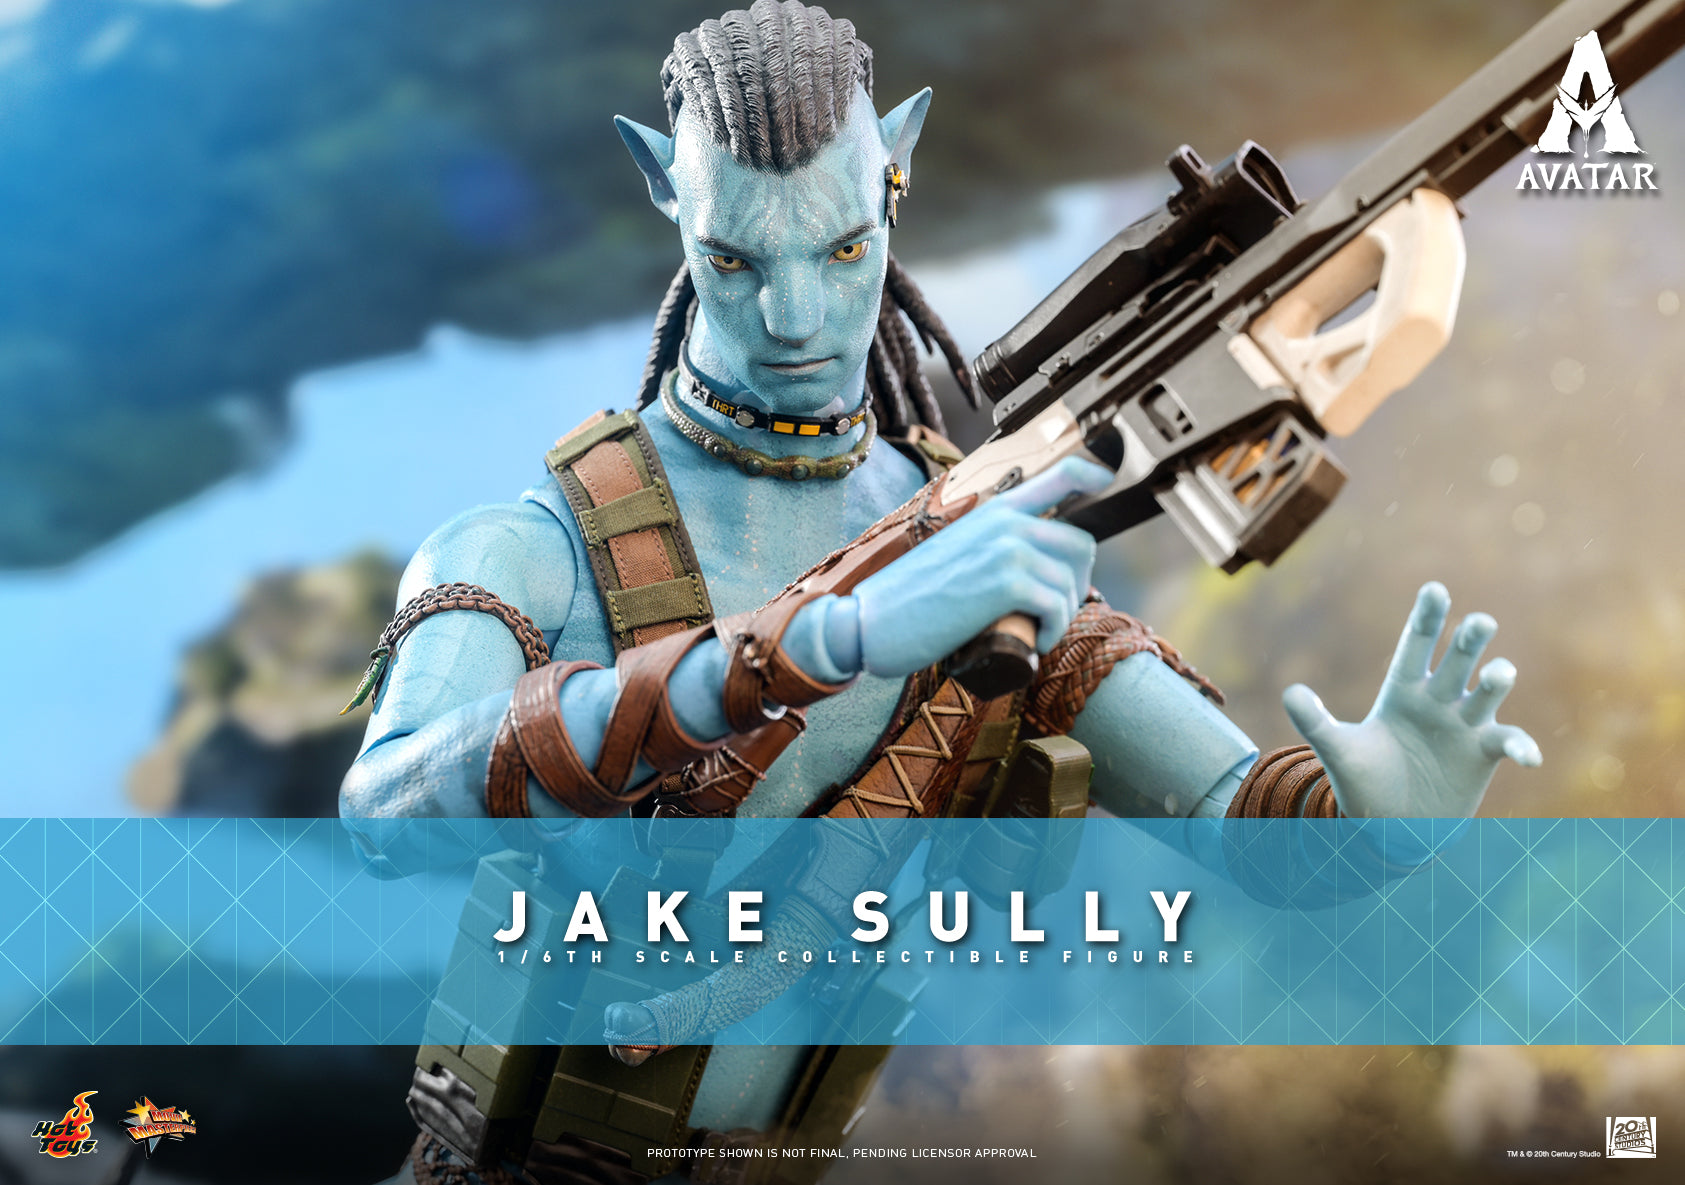 Hot Toys - MMS683 - Avatar: The Way of Water - Jake Sully - Marvelous Toys